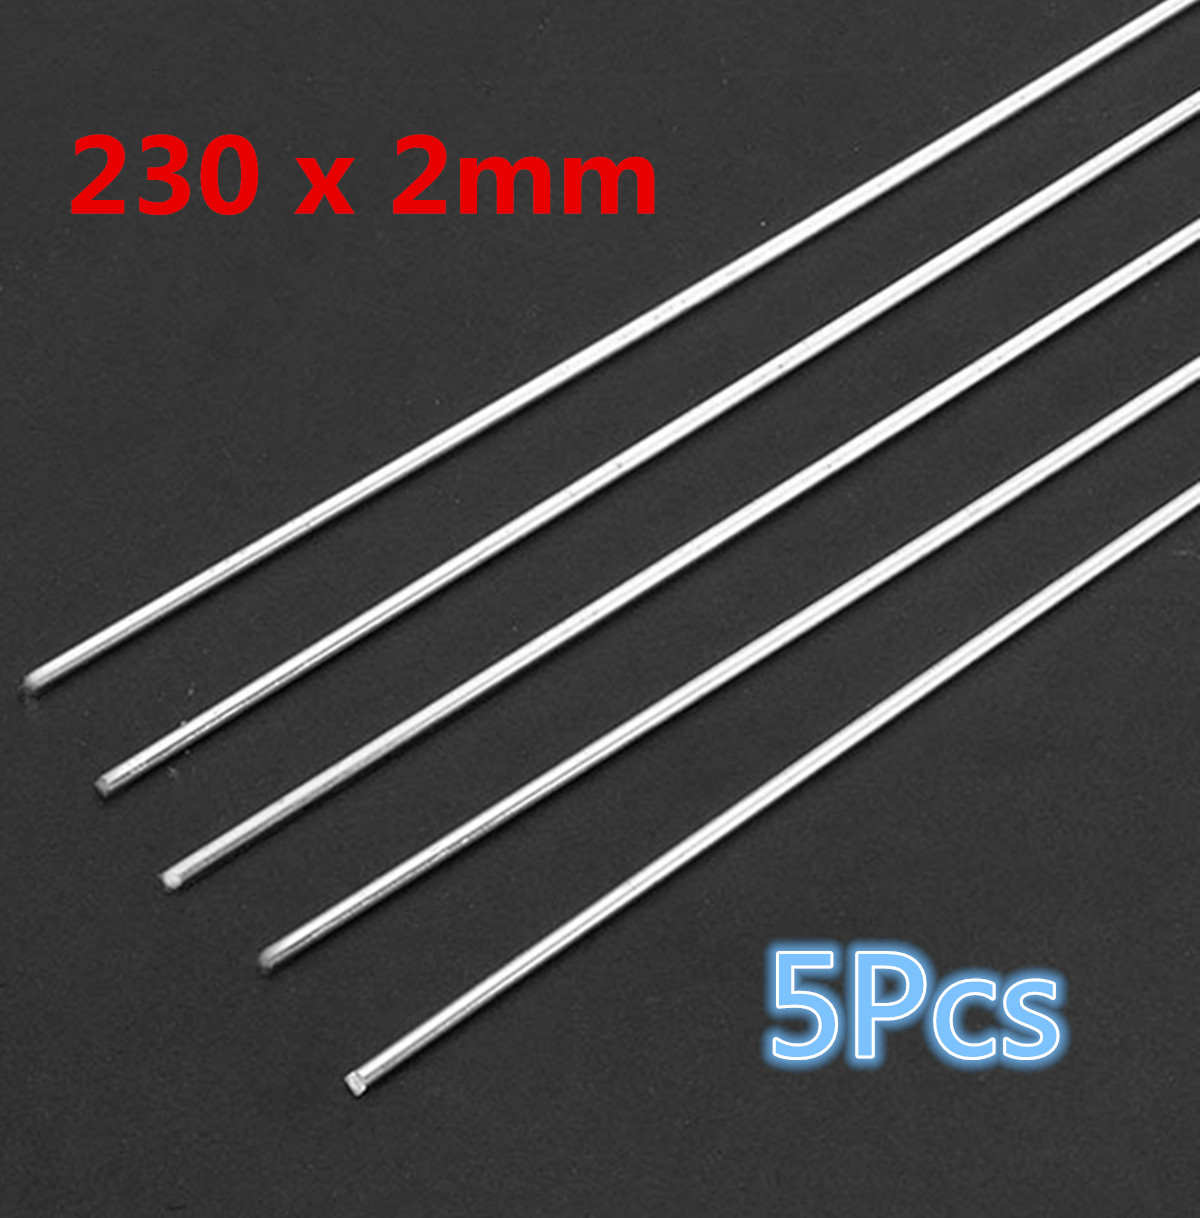 Find 5Pcs 230x2mm Low Temp Aluminum Repair Rods For Aluminum/Gas/Argon Arc Welding for Sale on Gipsybee.com with cryptocurrencies